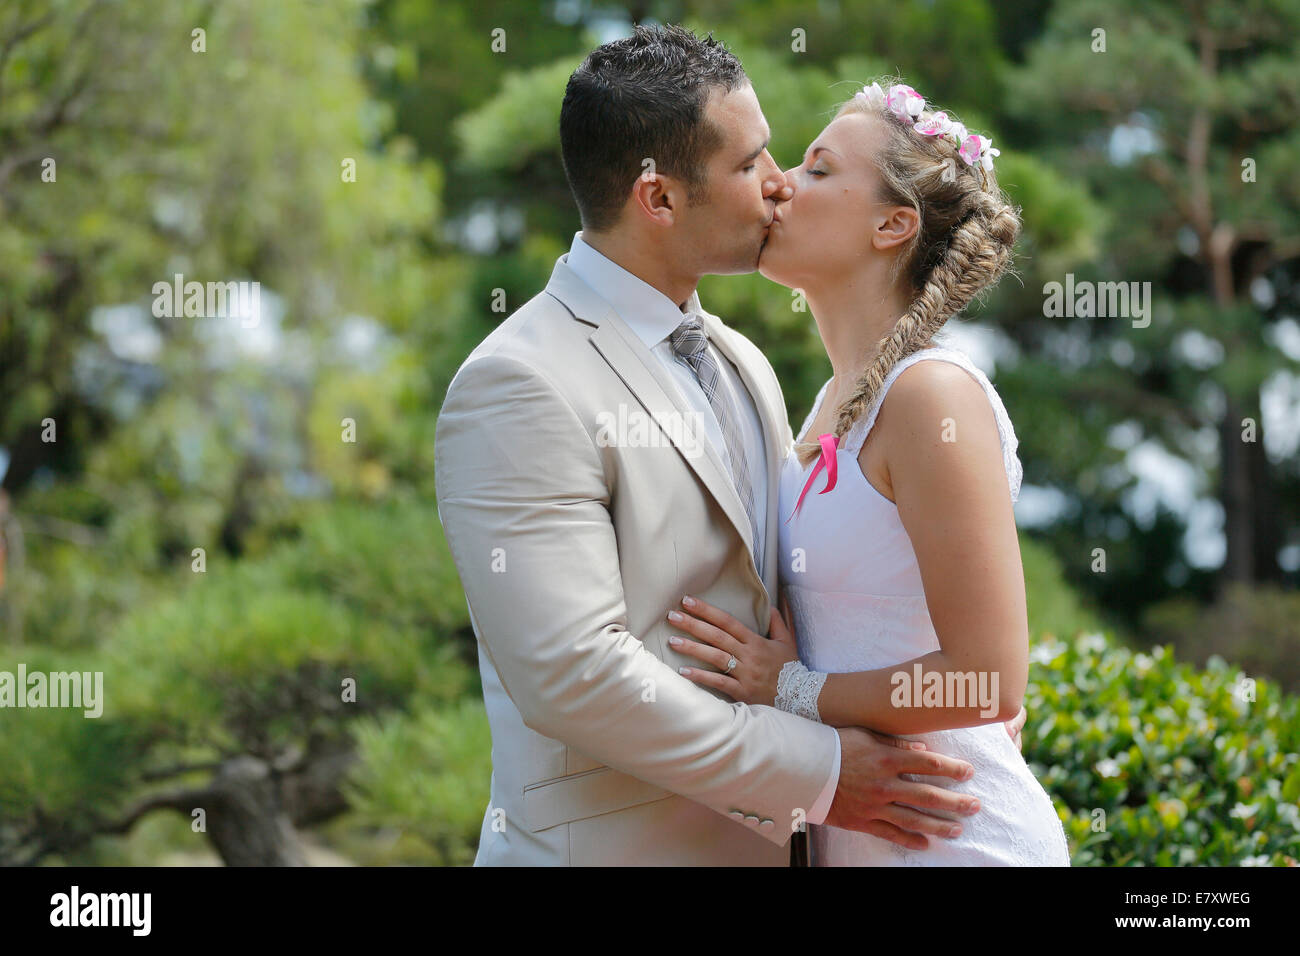 Bride and Groom kissing Banque D'Images